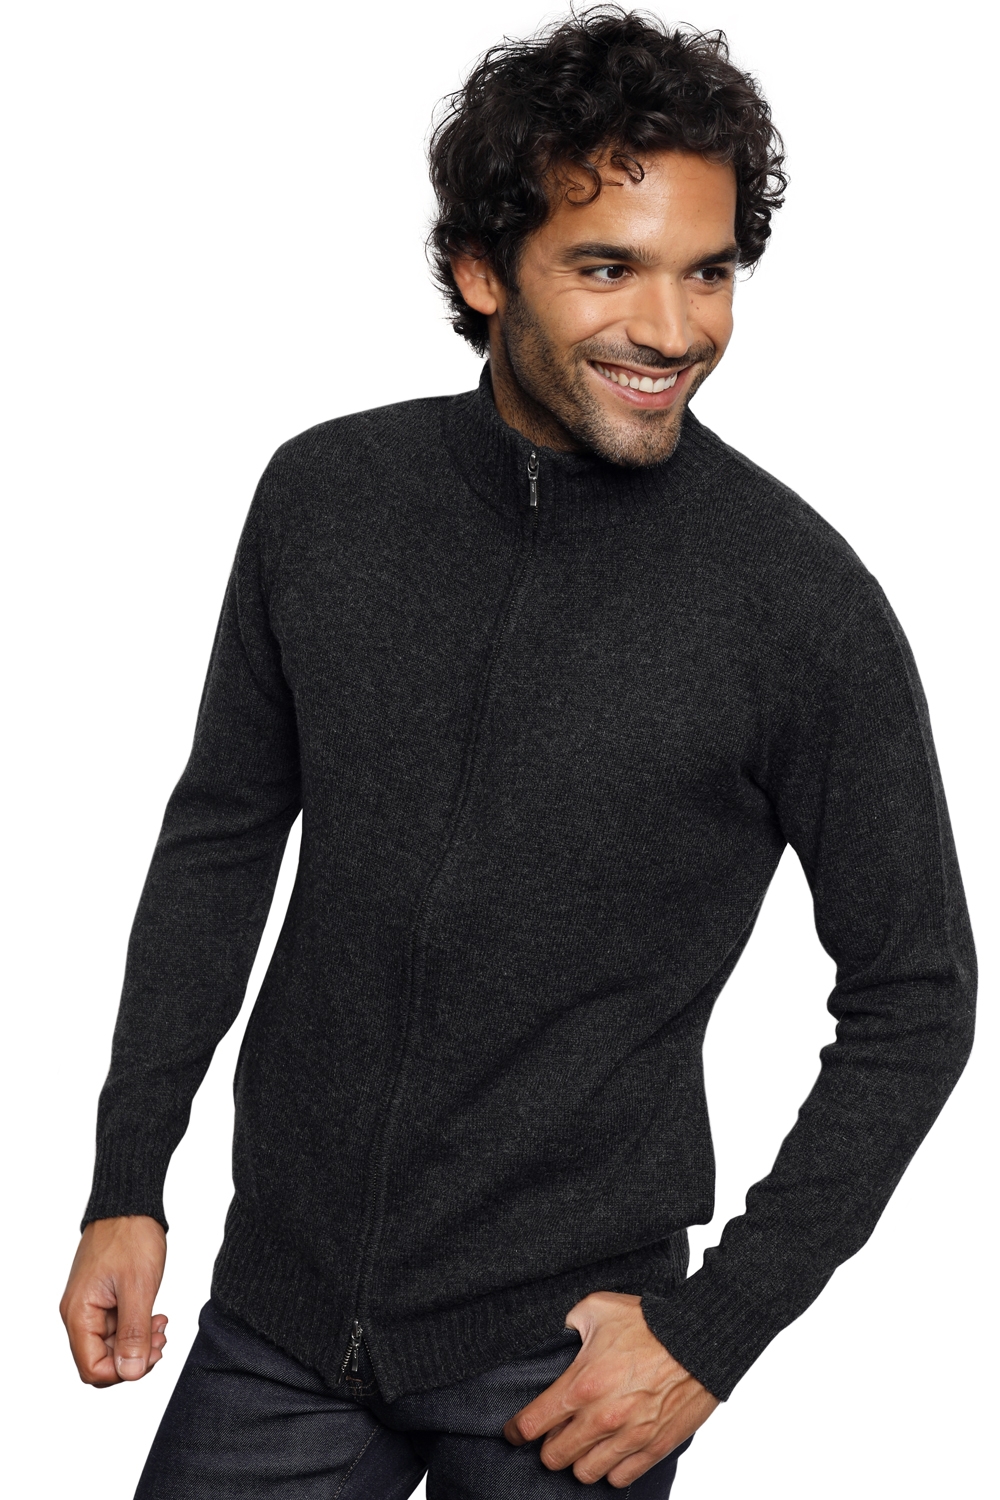 Chameau pull homme zip capuche clyde anthracite xs